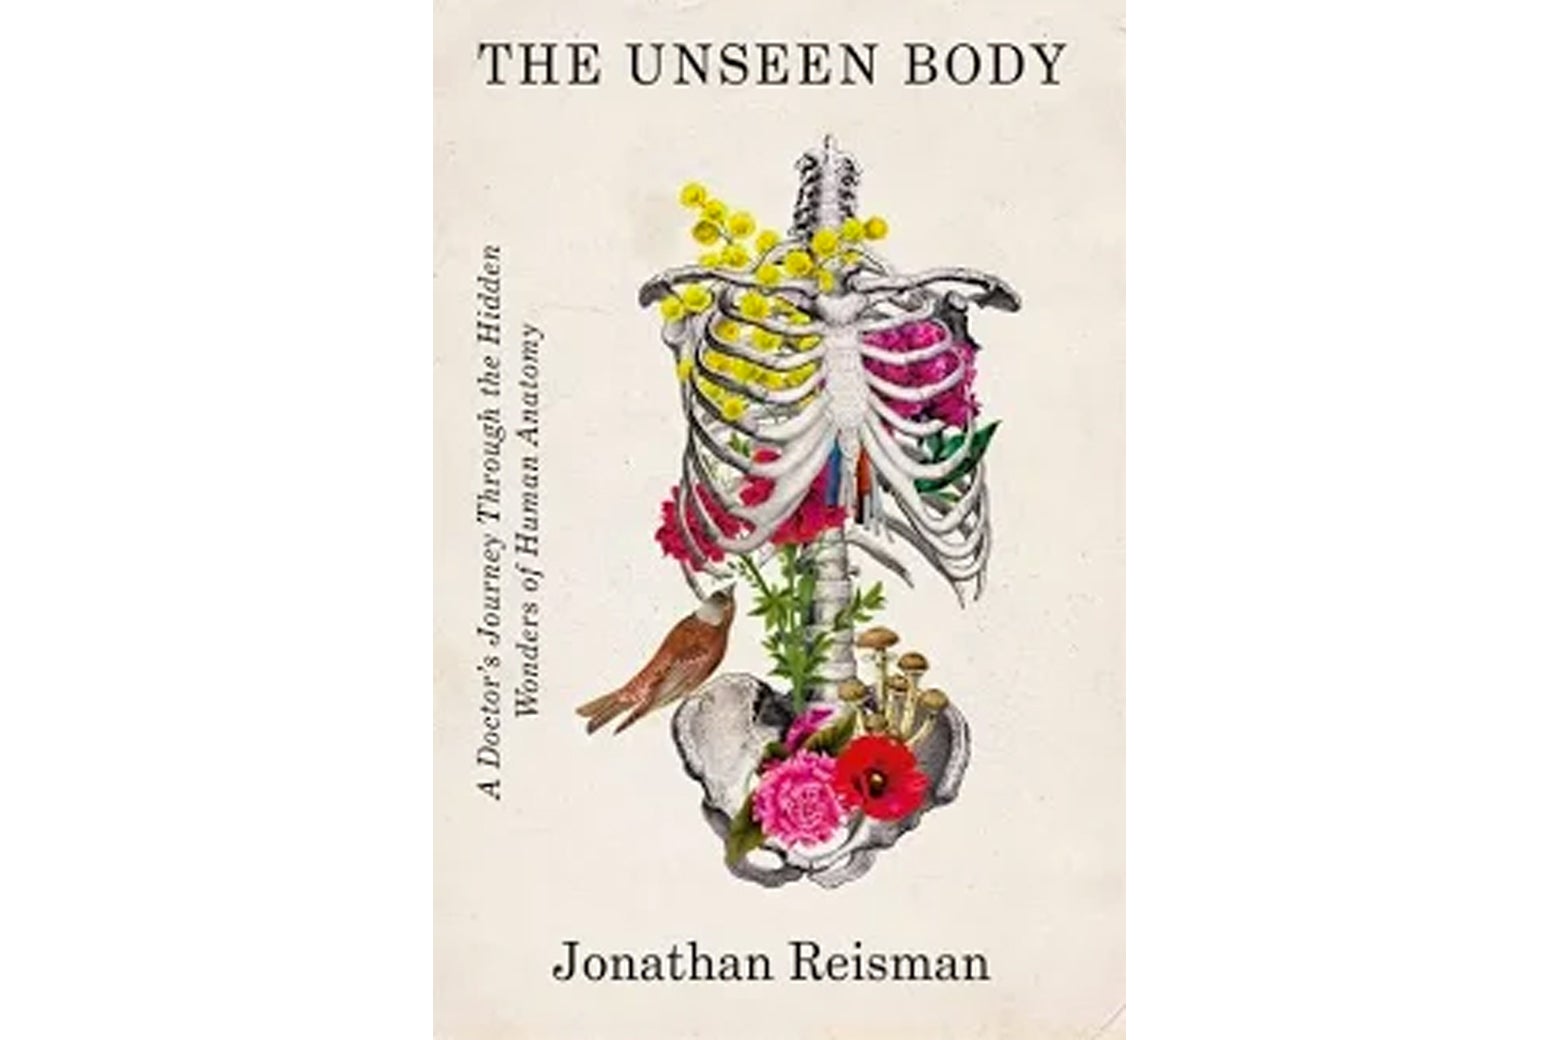 The Unseen Body book cover featuring a rib cage filled with flowers